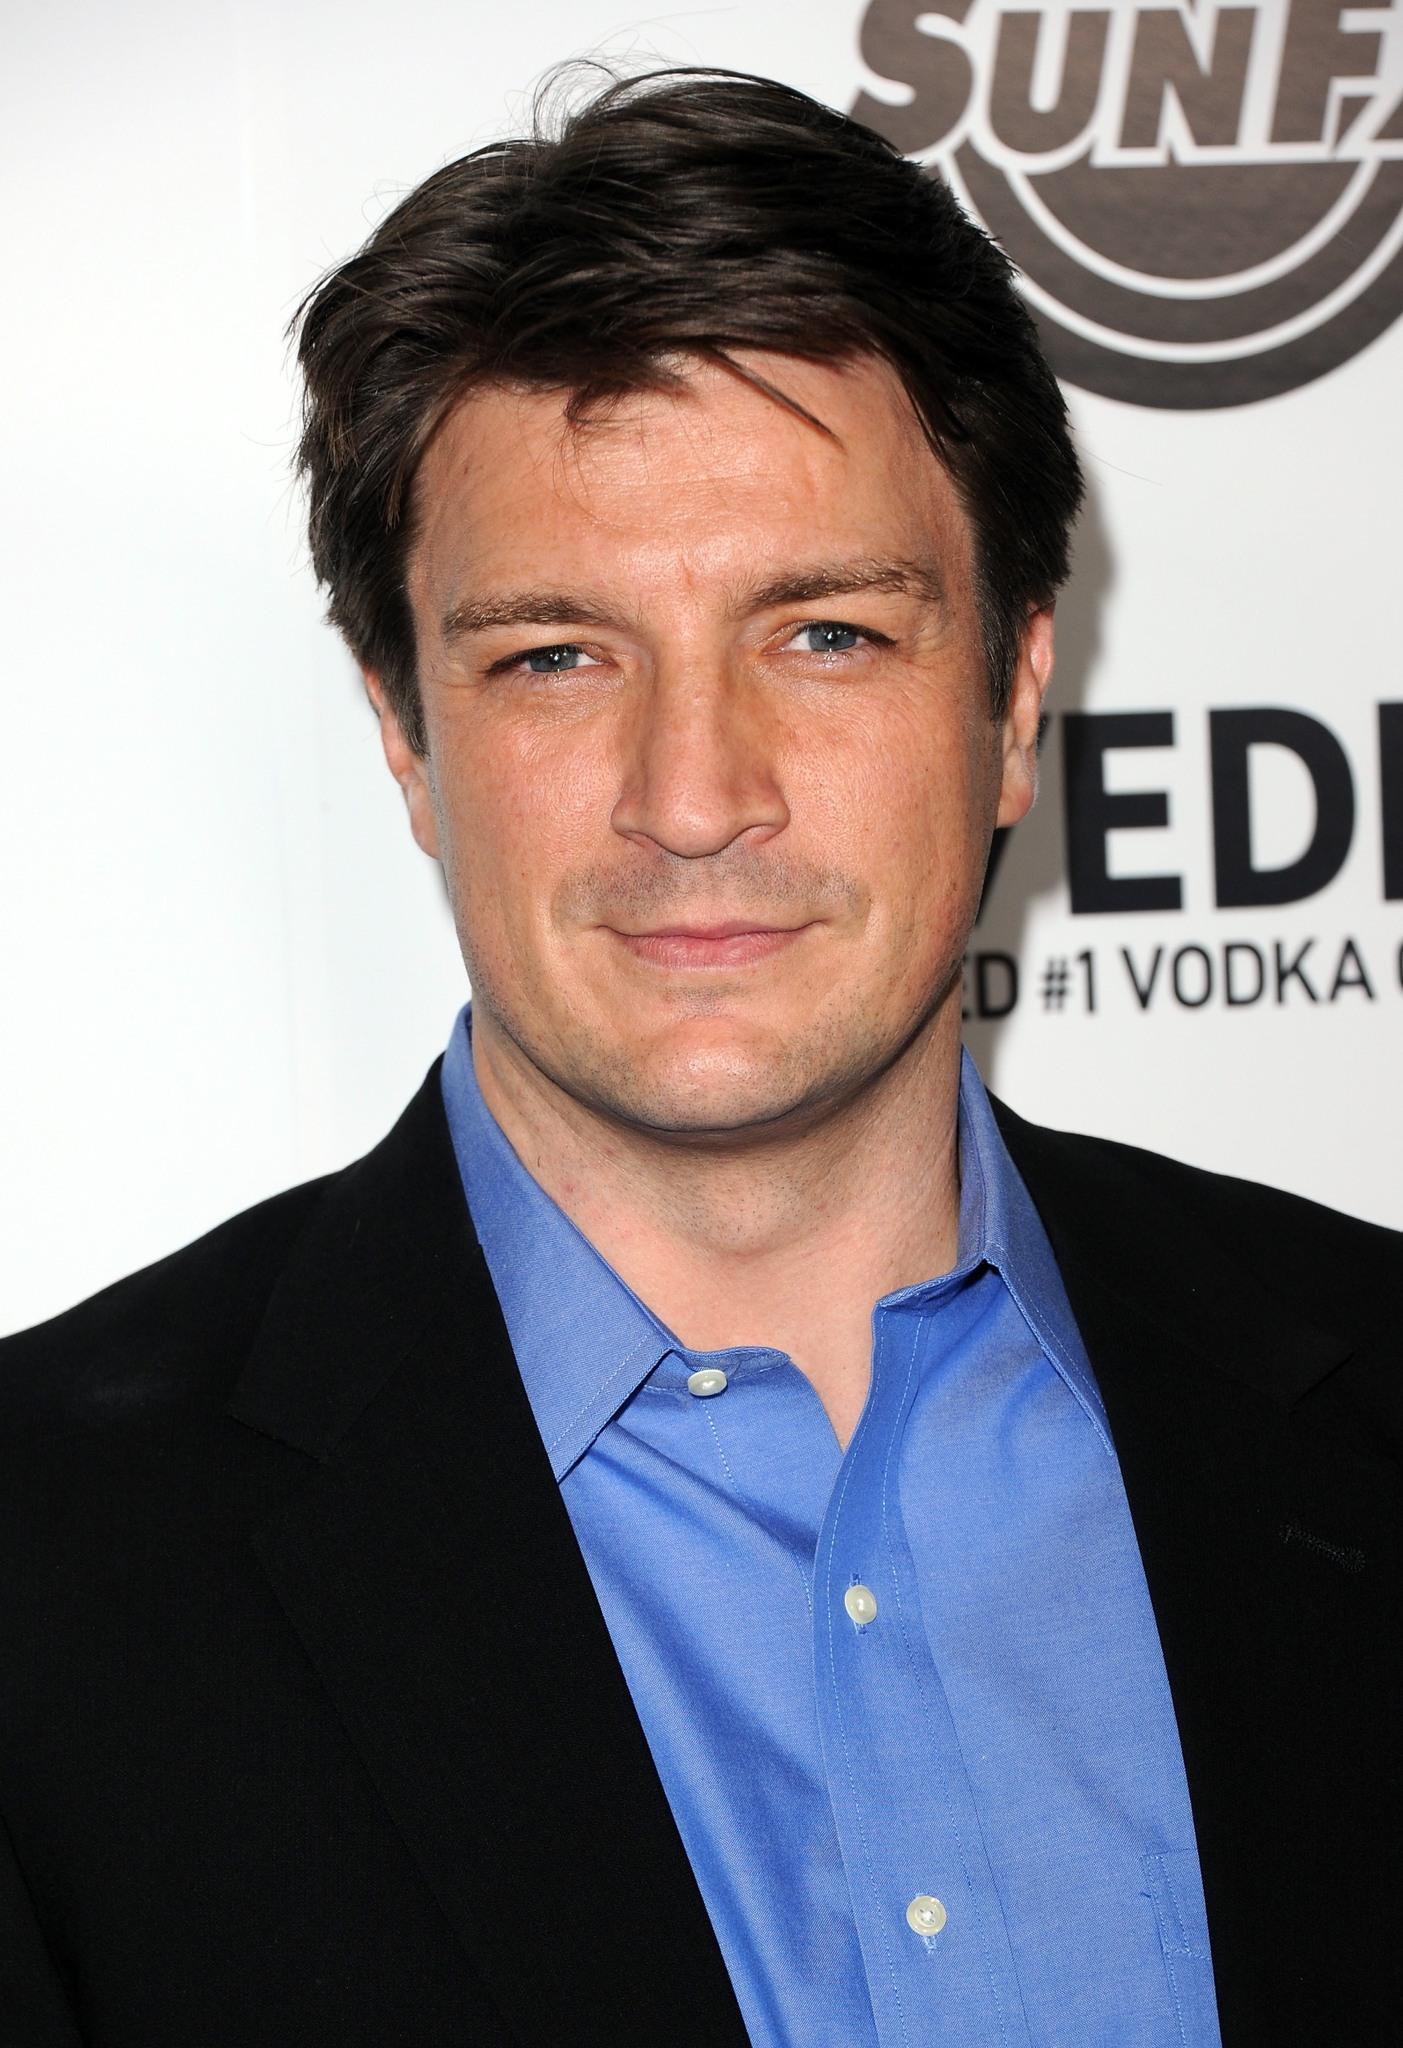 Nathan Fillion (Canadian-American Actor) - Age, Height, Wife, Net Worth